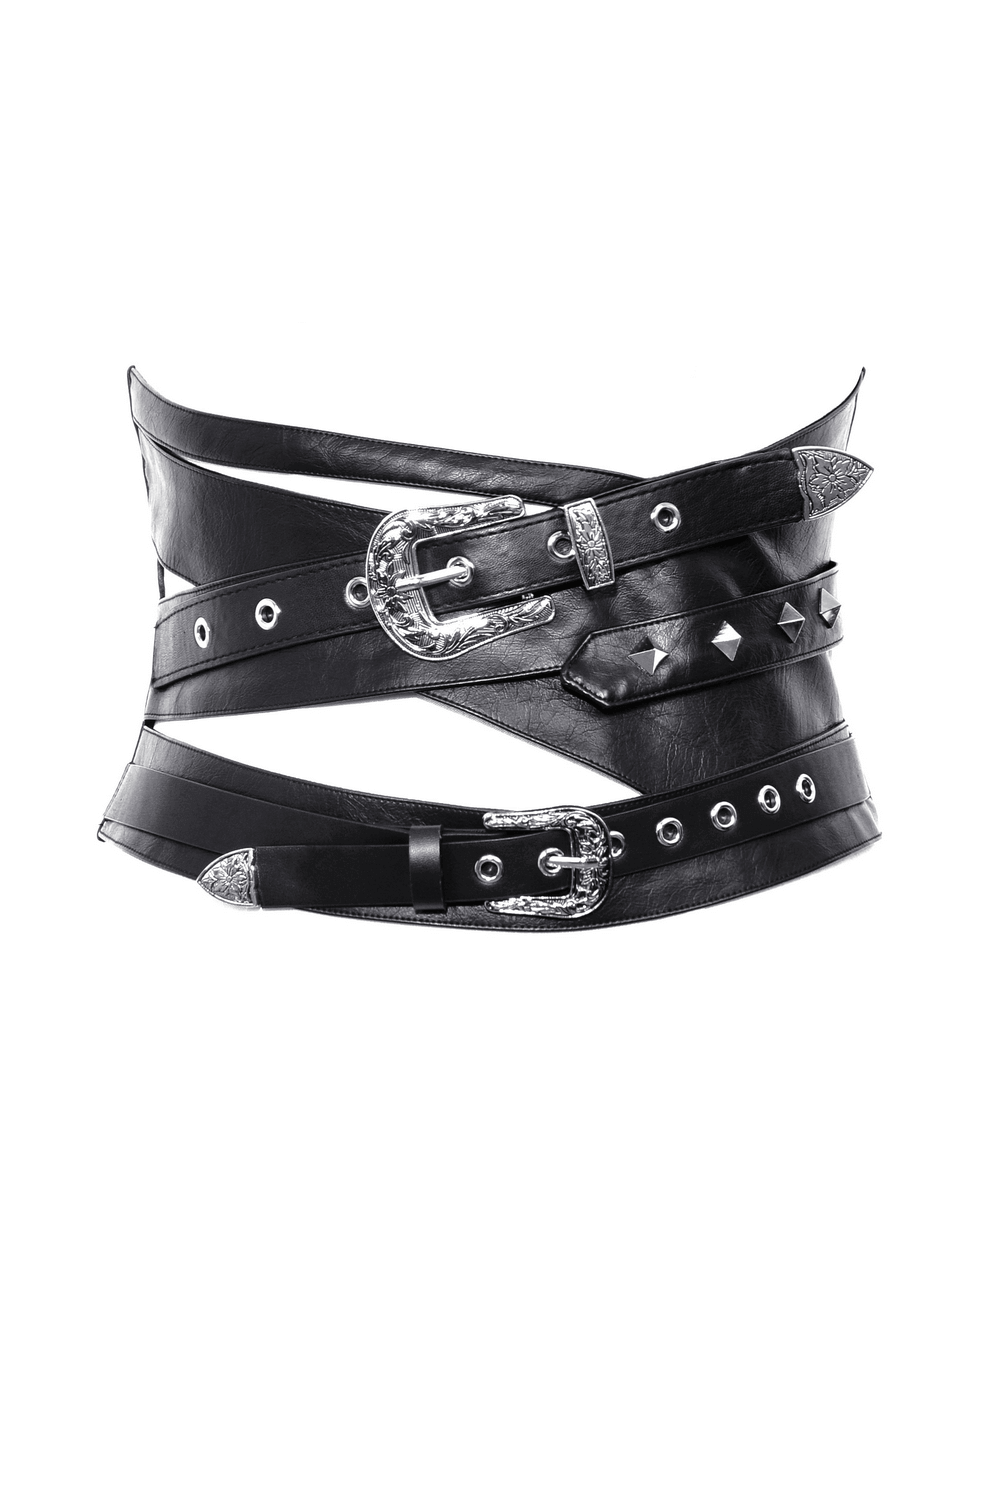 Women's Goth Style Accessories: Hats, Gloves, Belts and more